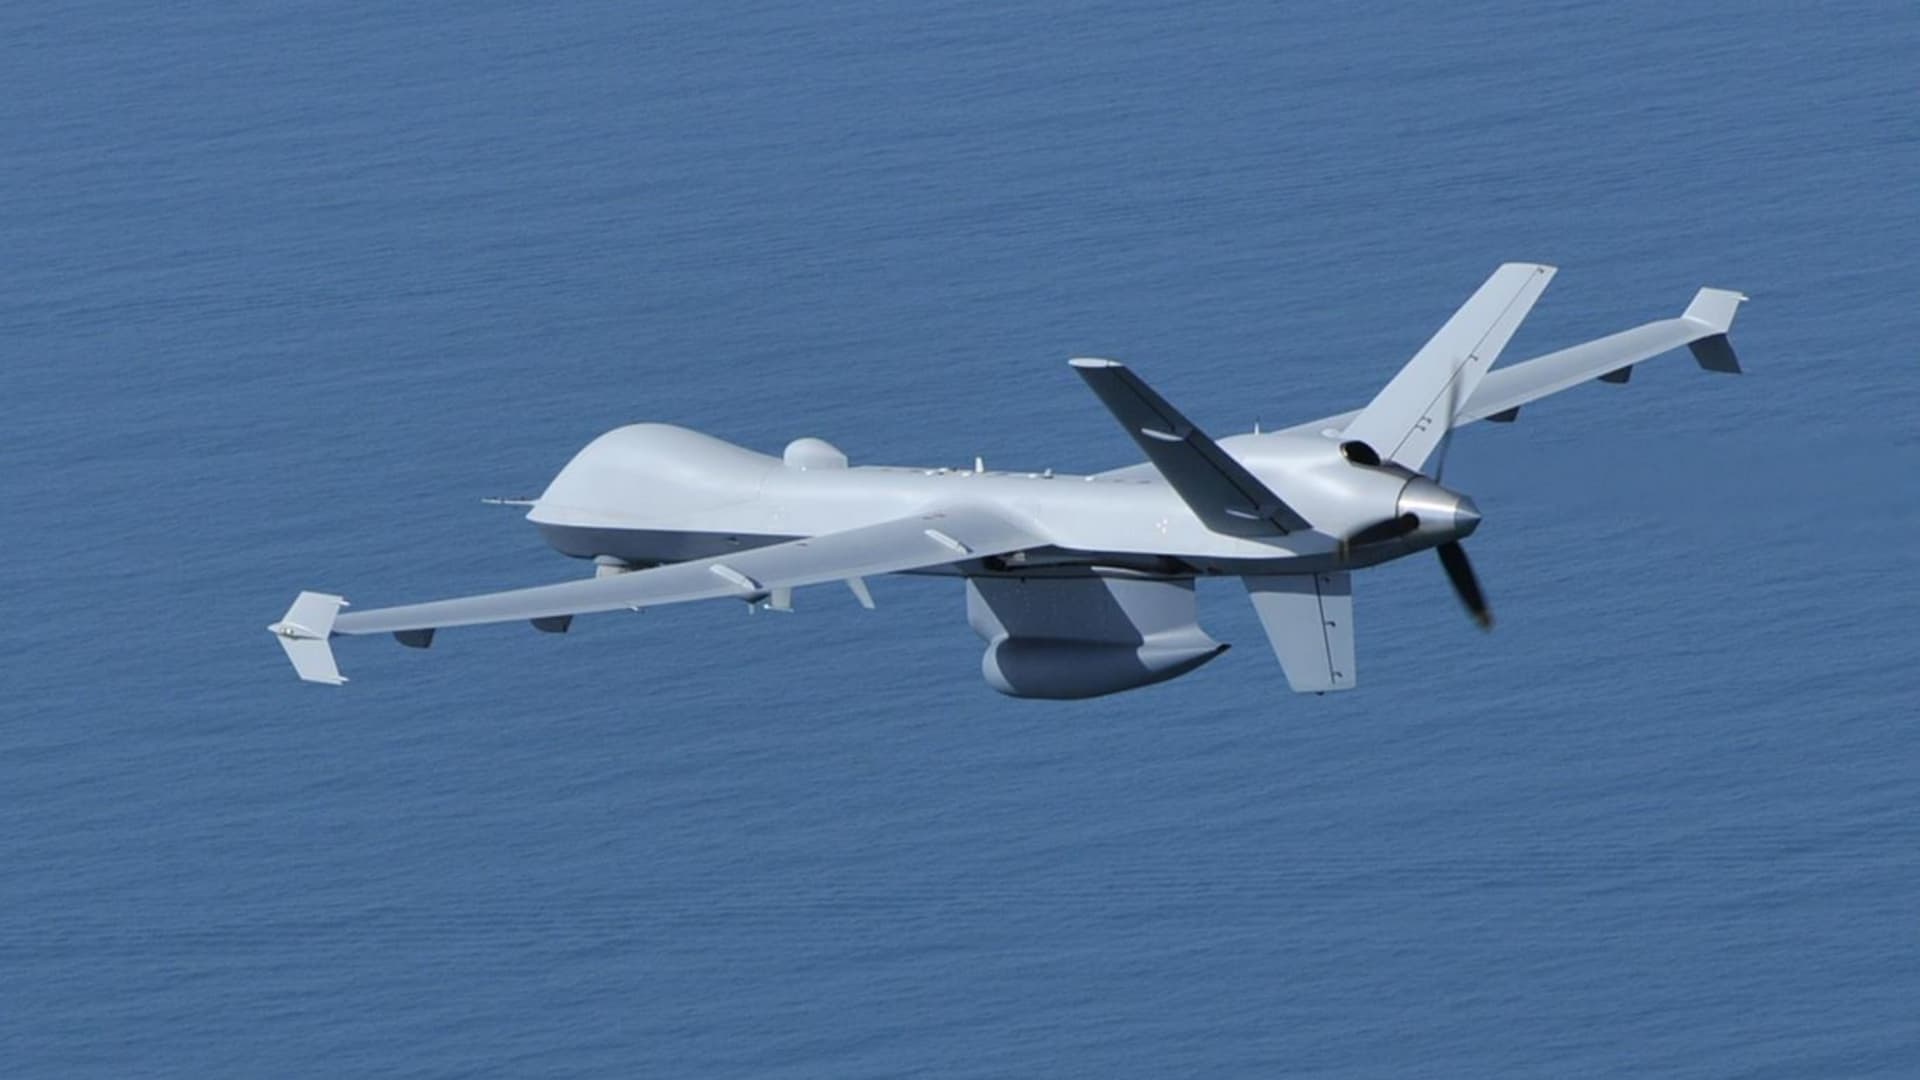 General Atomics' Guardian drone, which is the maritime version of the company's Predator B or MQ-9 Reaper unmanned aerial vehicle.